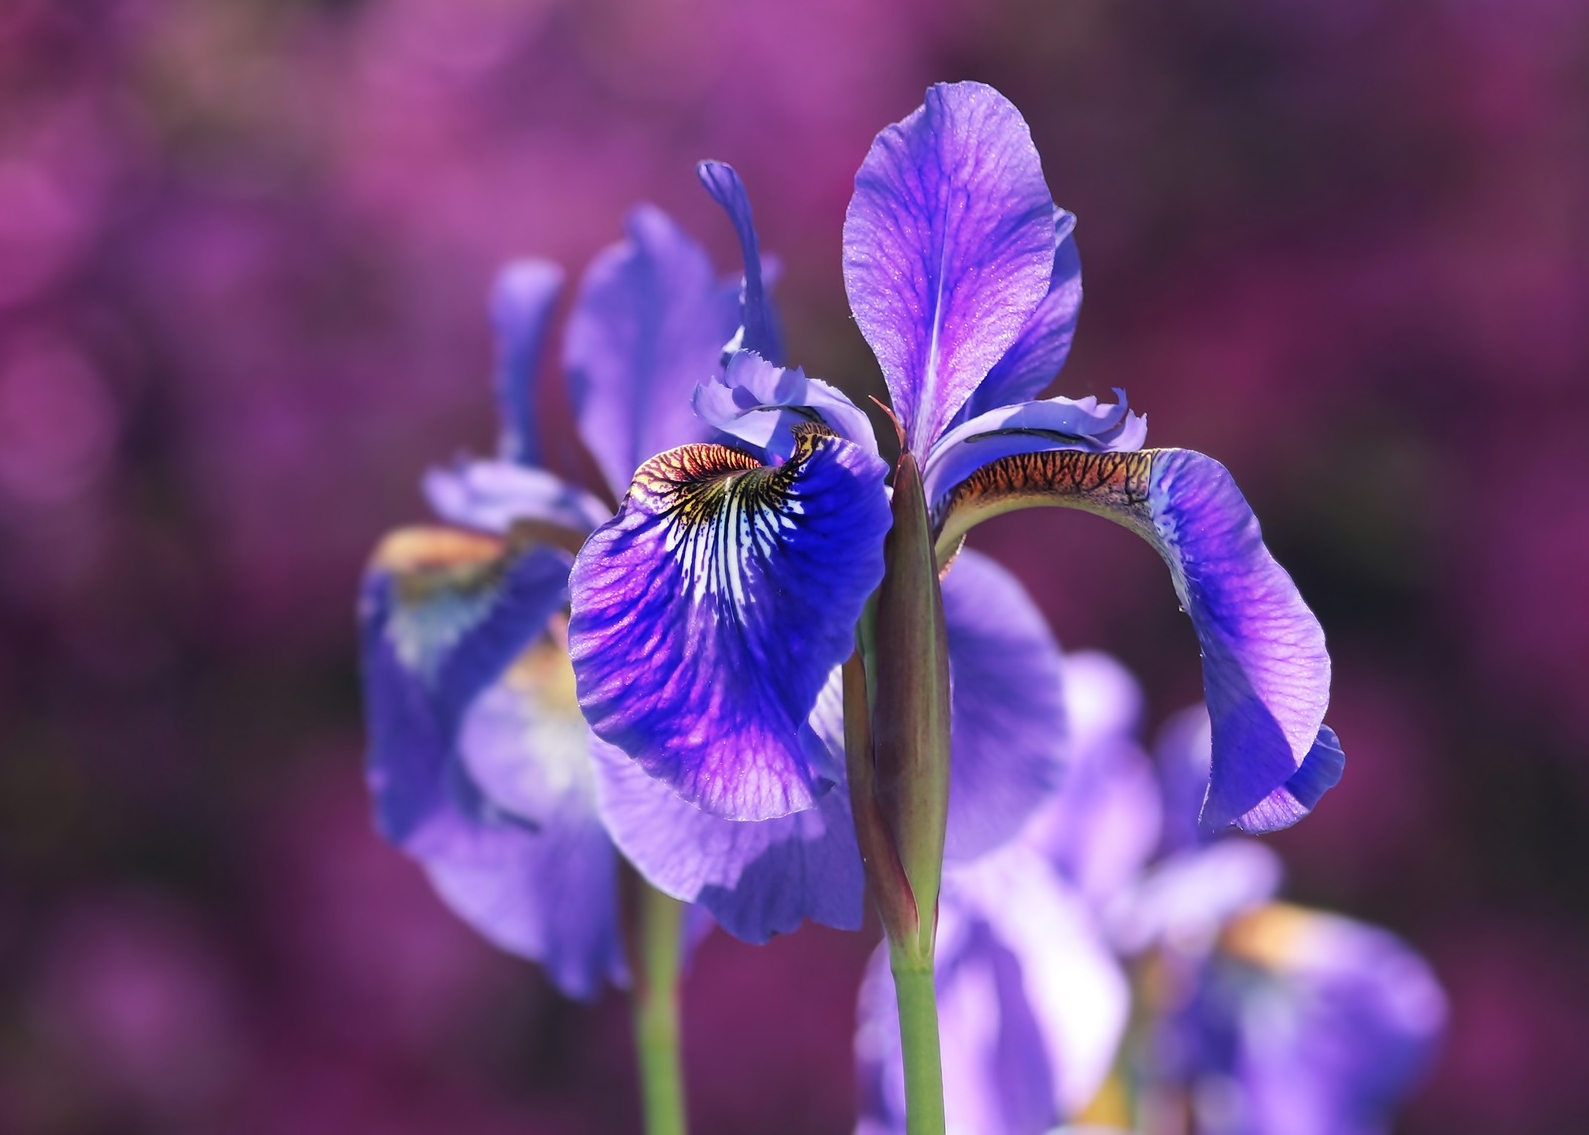 Irises How To Plant Grow And Care For Iris Flowers The Old Farmer S Almanac